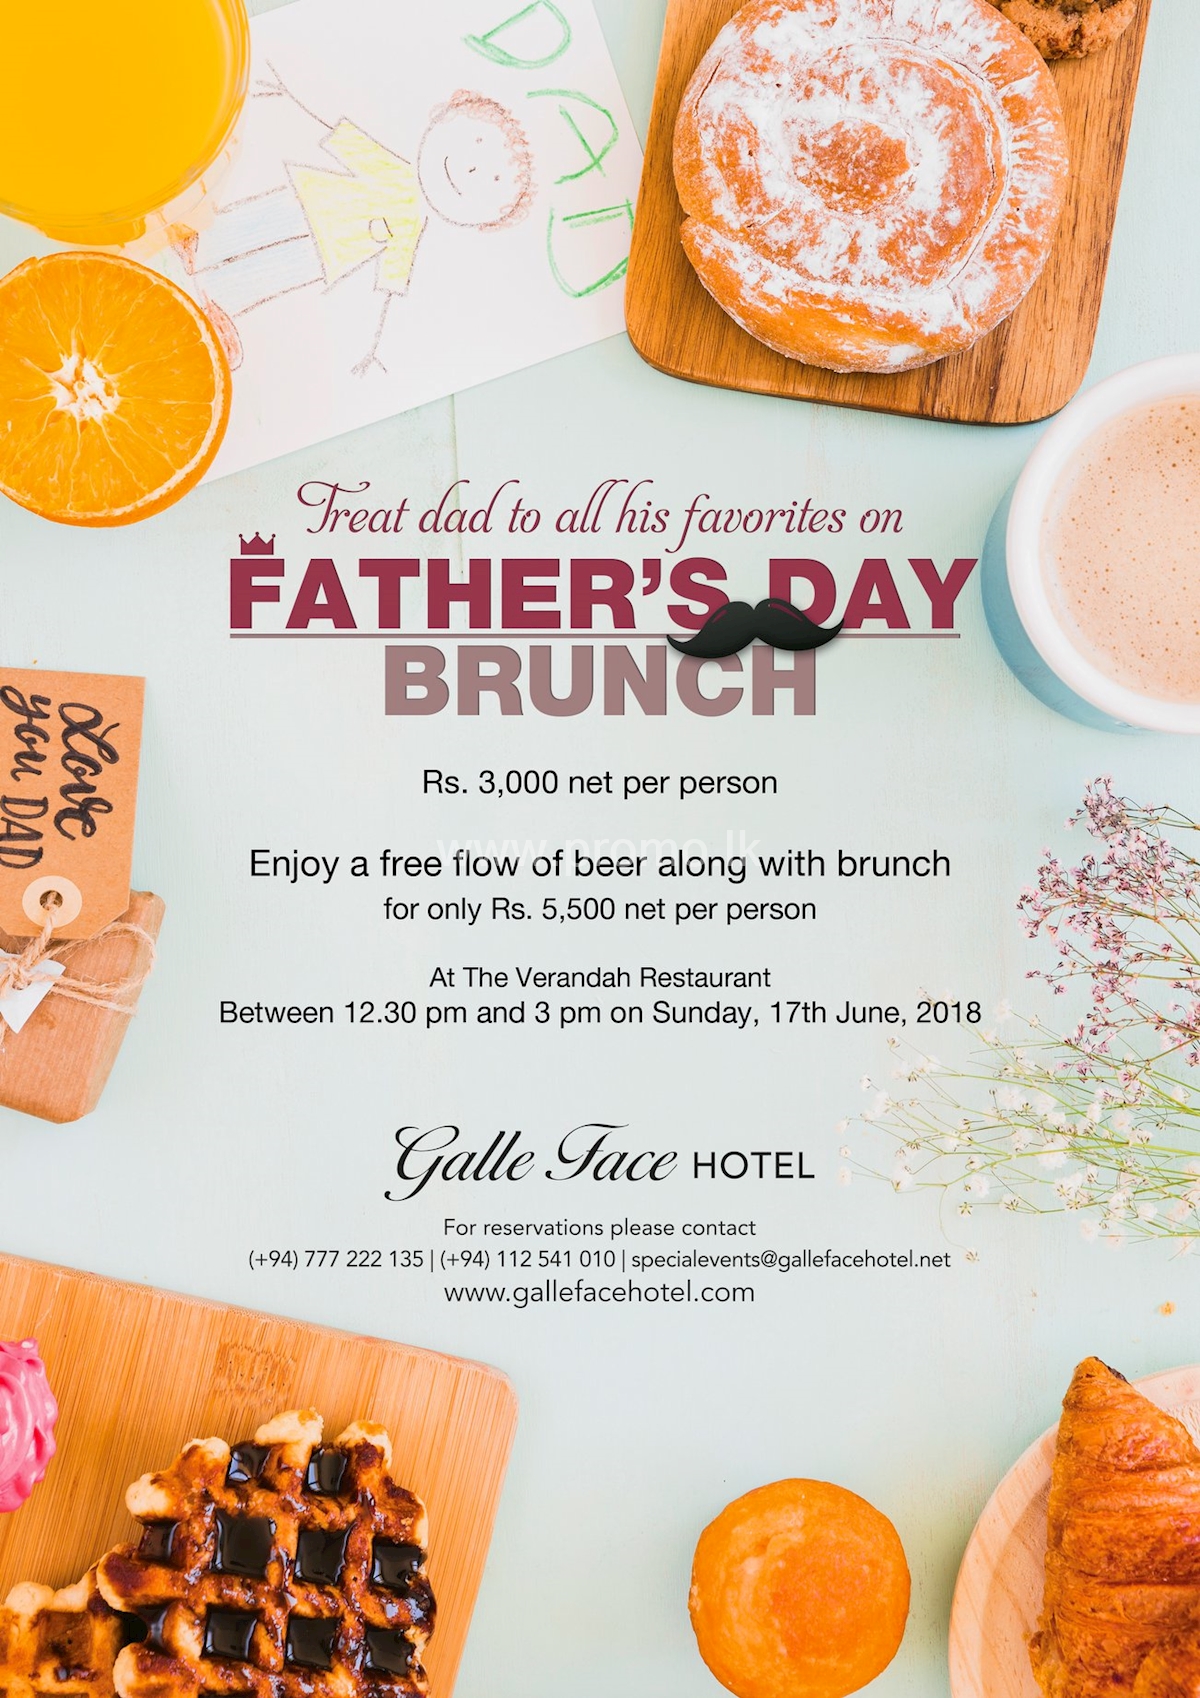 Father's Day Brunch from Galle Face Hotel